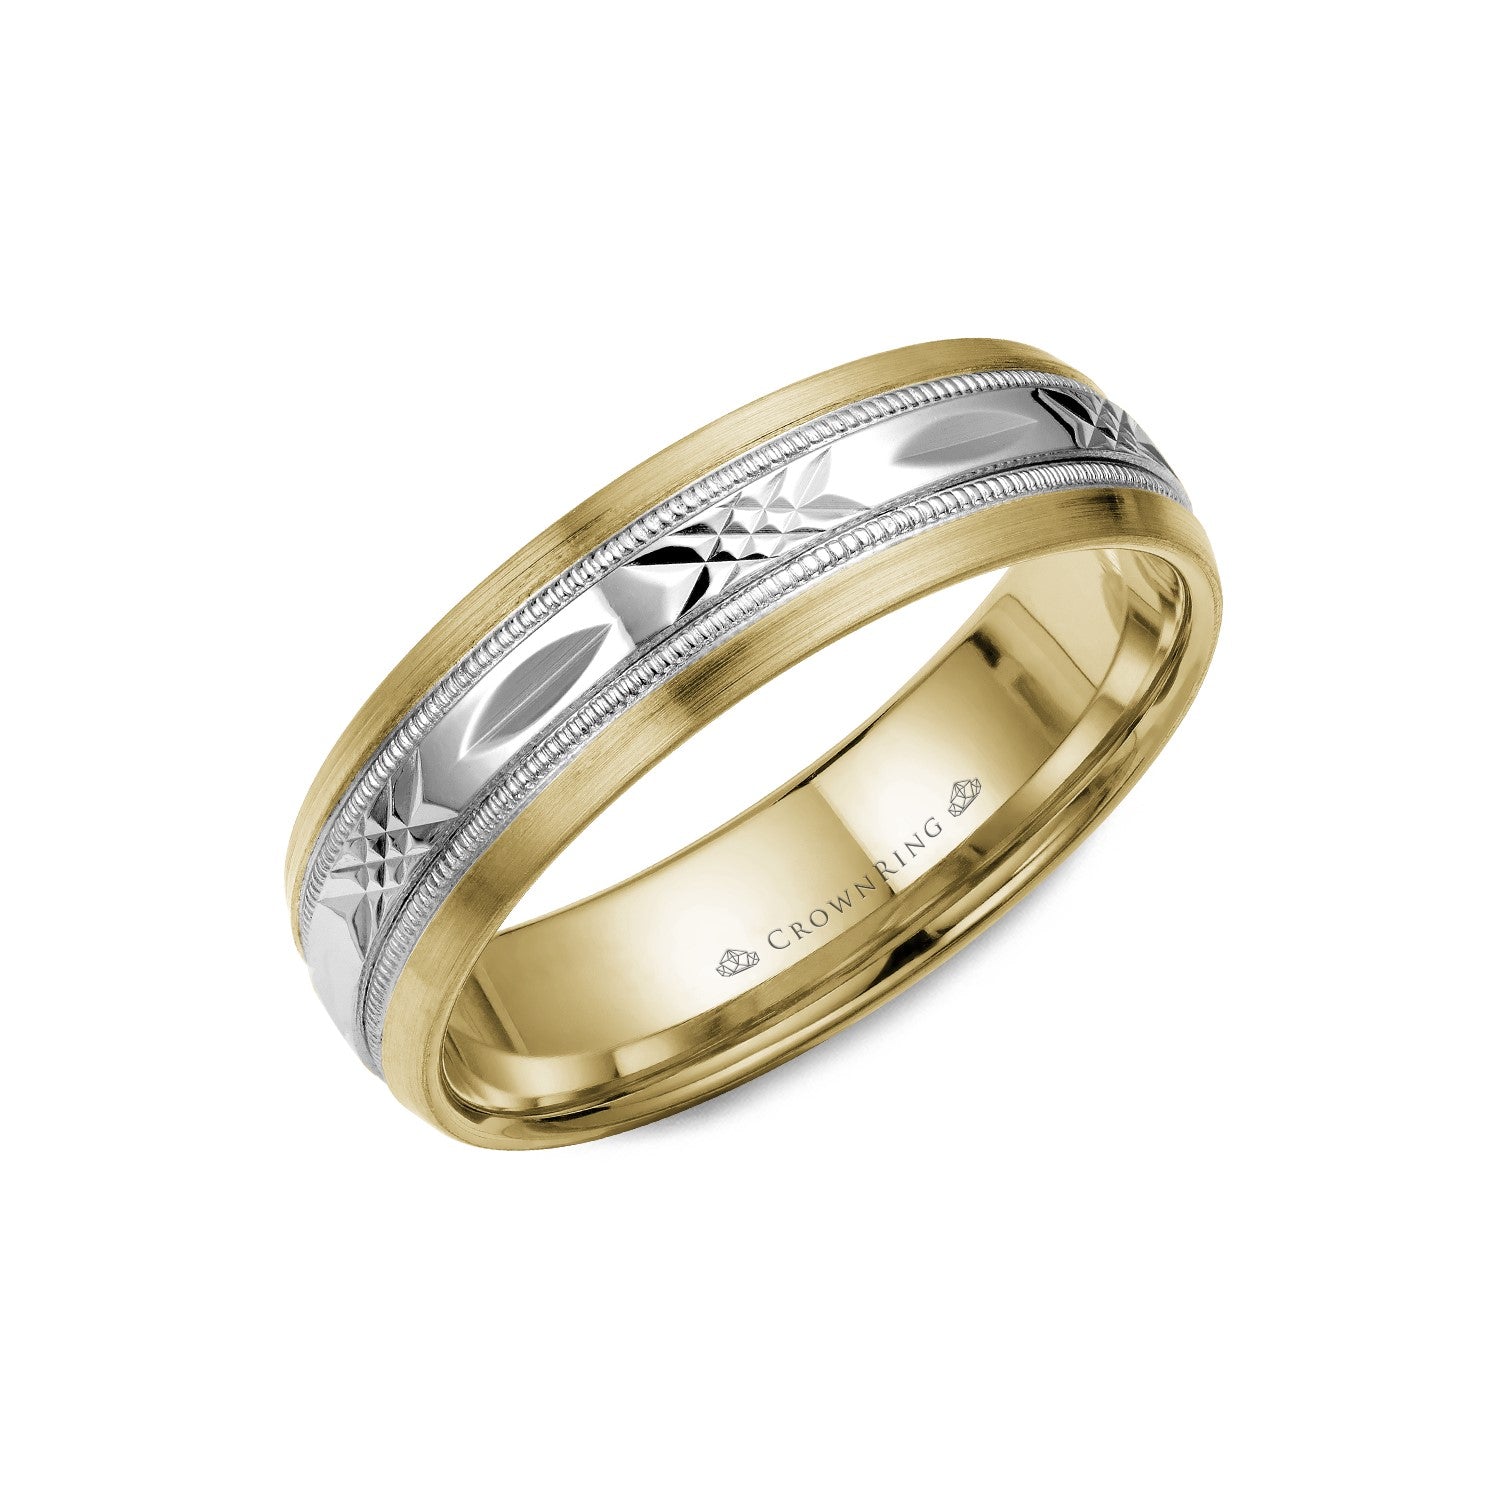 6mm Classic Wedding Band Carved With High Polish Finish & Sandpaper Edges